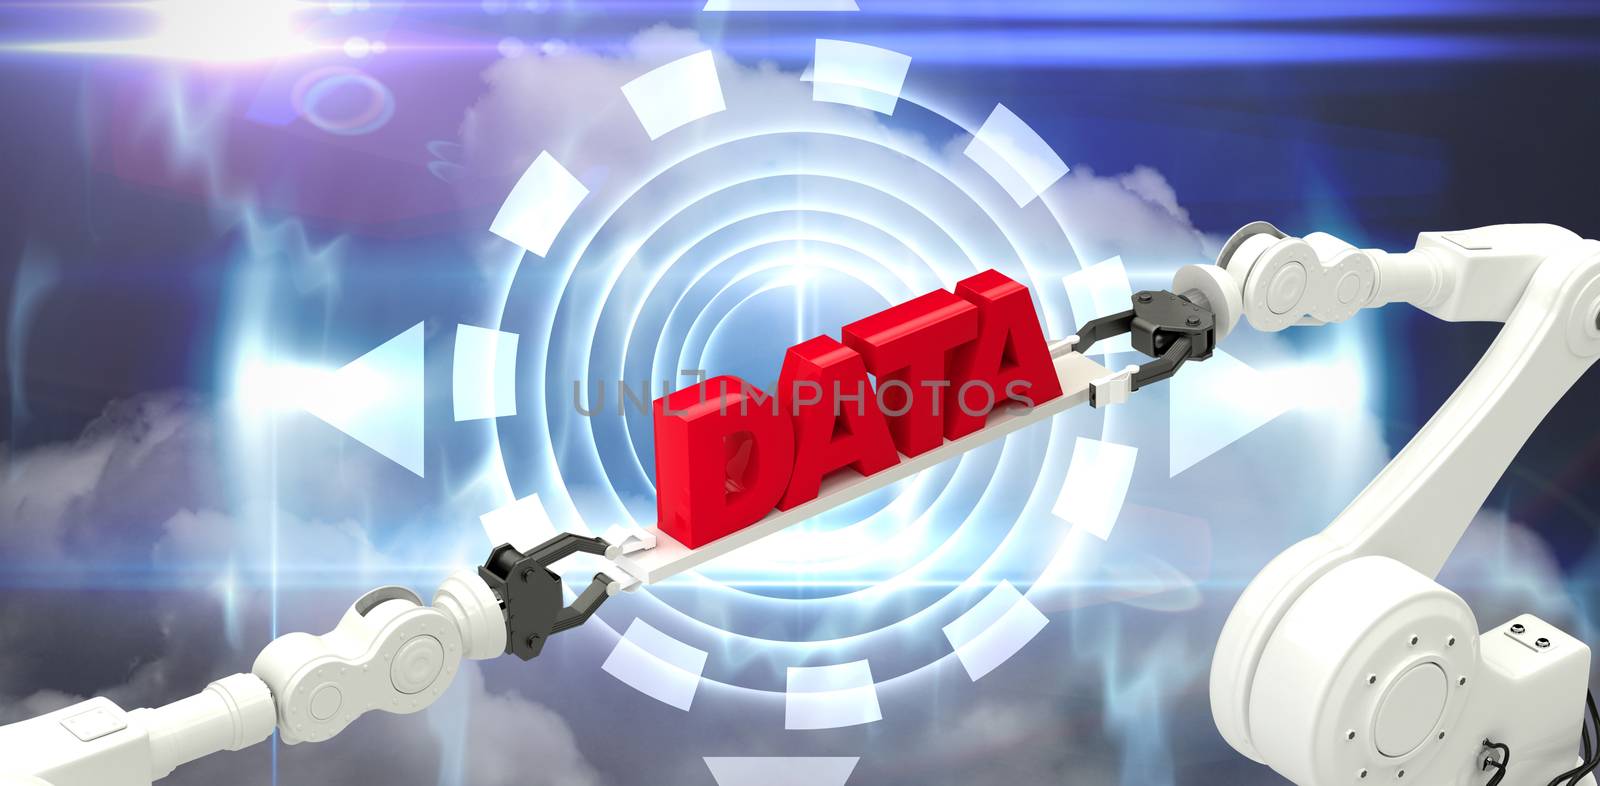 Robotic hands holding red data message over white background against blue technology design with circle